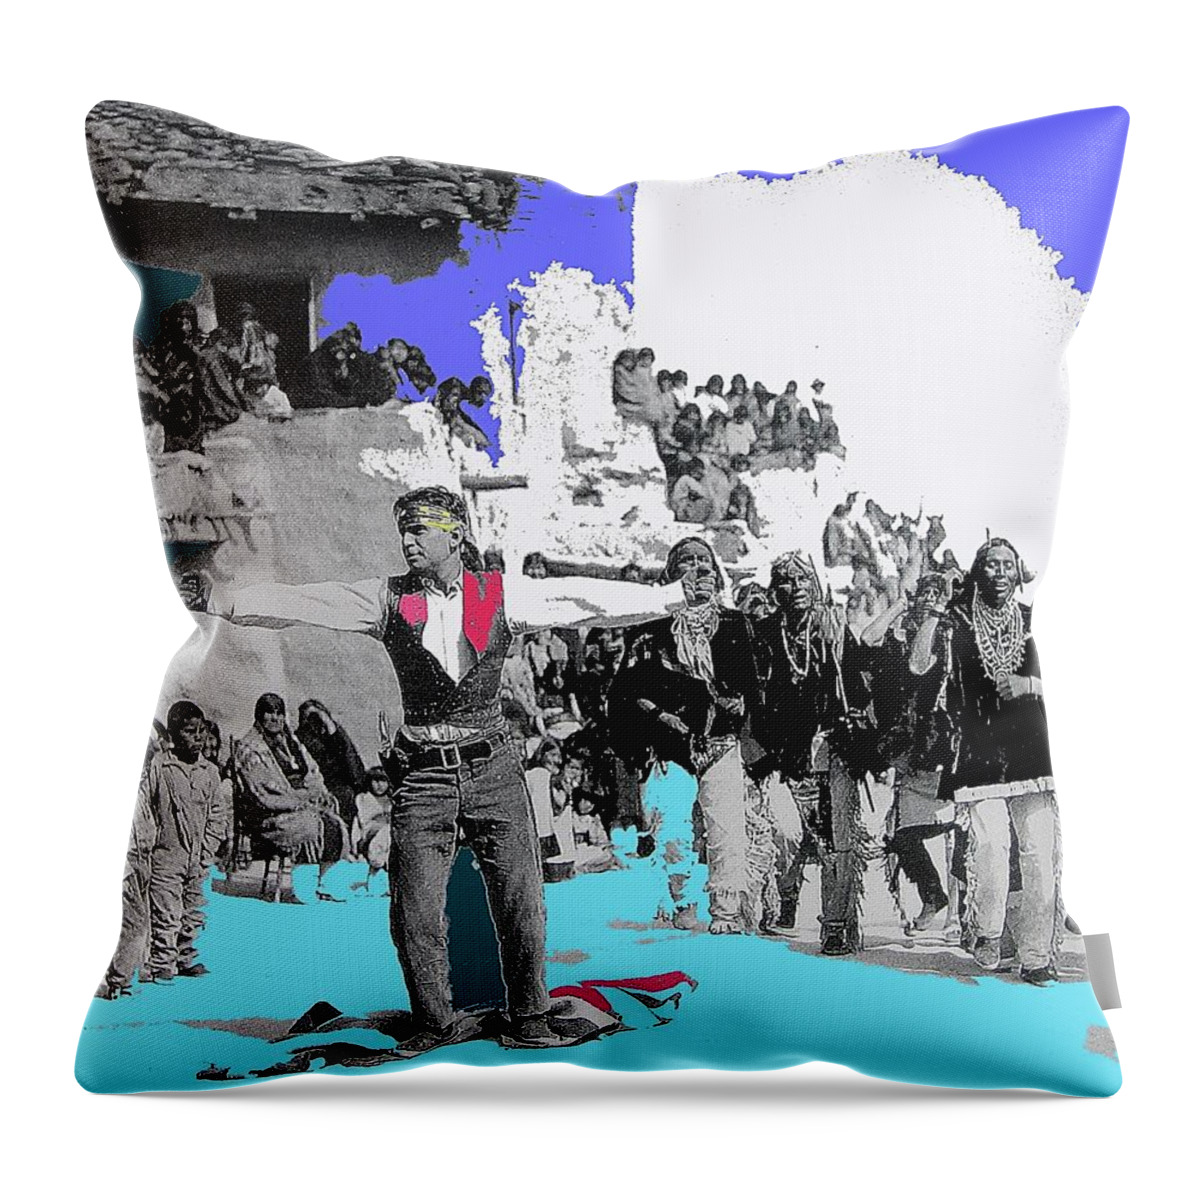 Film Homage Victor Fleming Douglas Fairbanks The Mollycoddle 1920 Hopi Indians Collage 2012 Throw Pillow featuring the photograph Film Homage Victor Fleming Douglas Fairbanks The Mollycoddle 1920 Hopi Indians Collage 2012 #1 by David Lee Guss